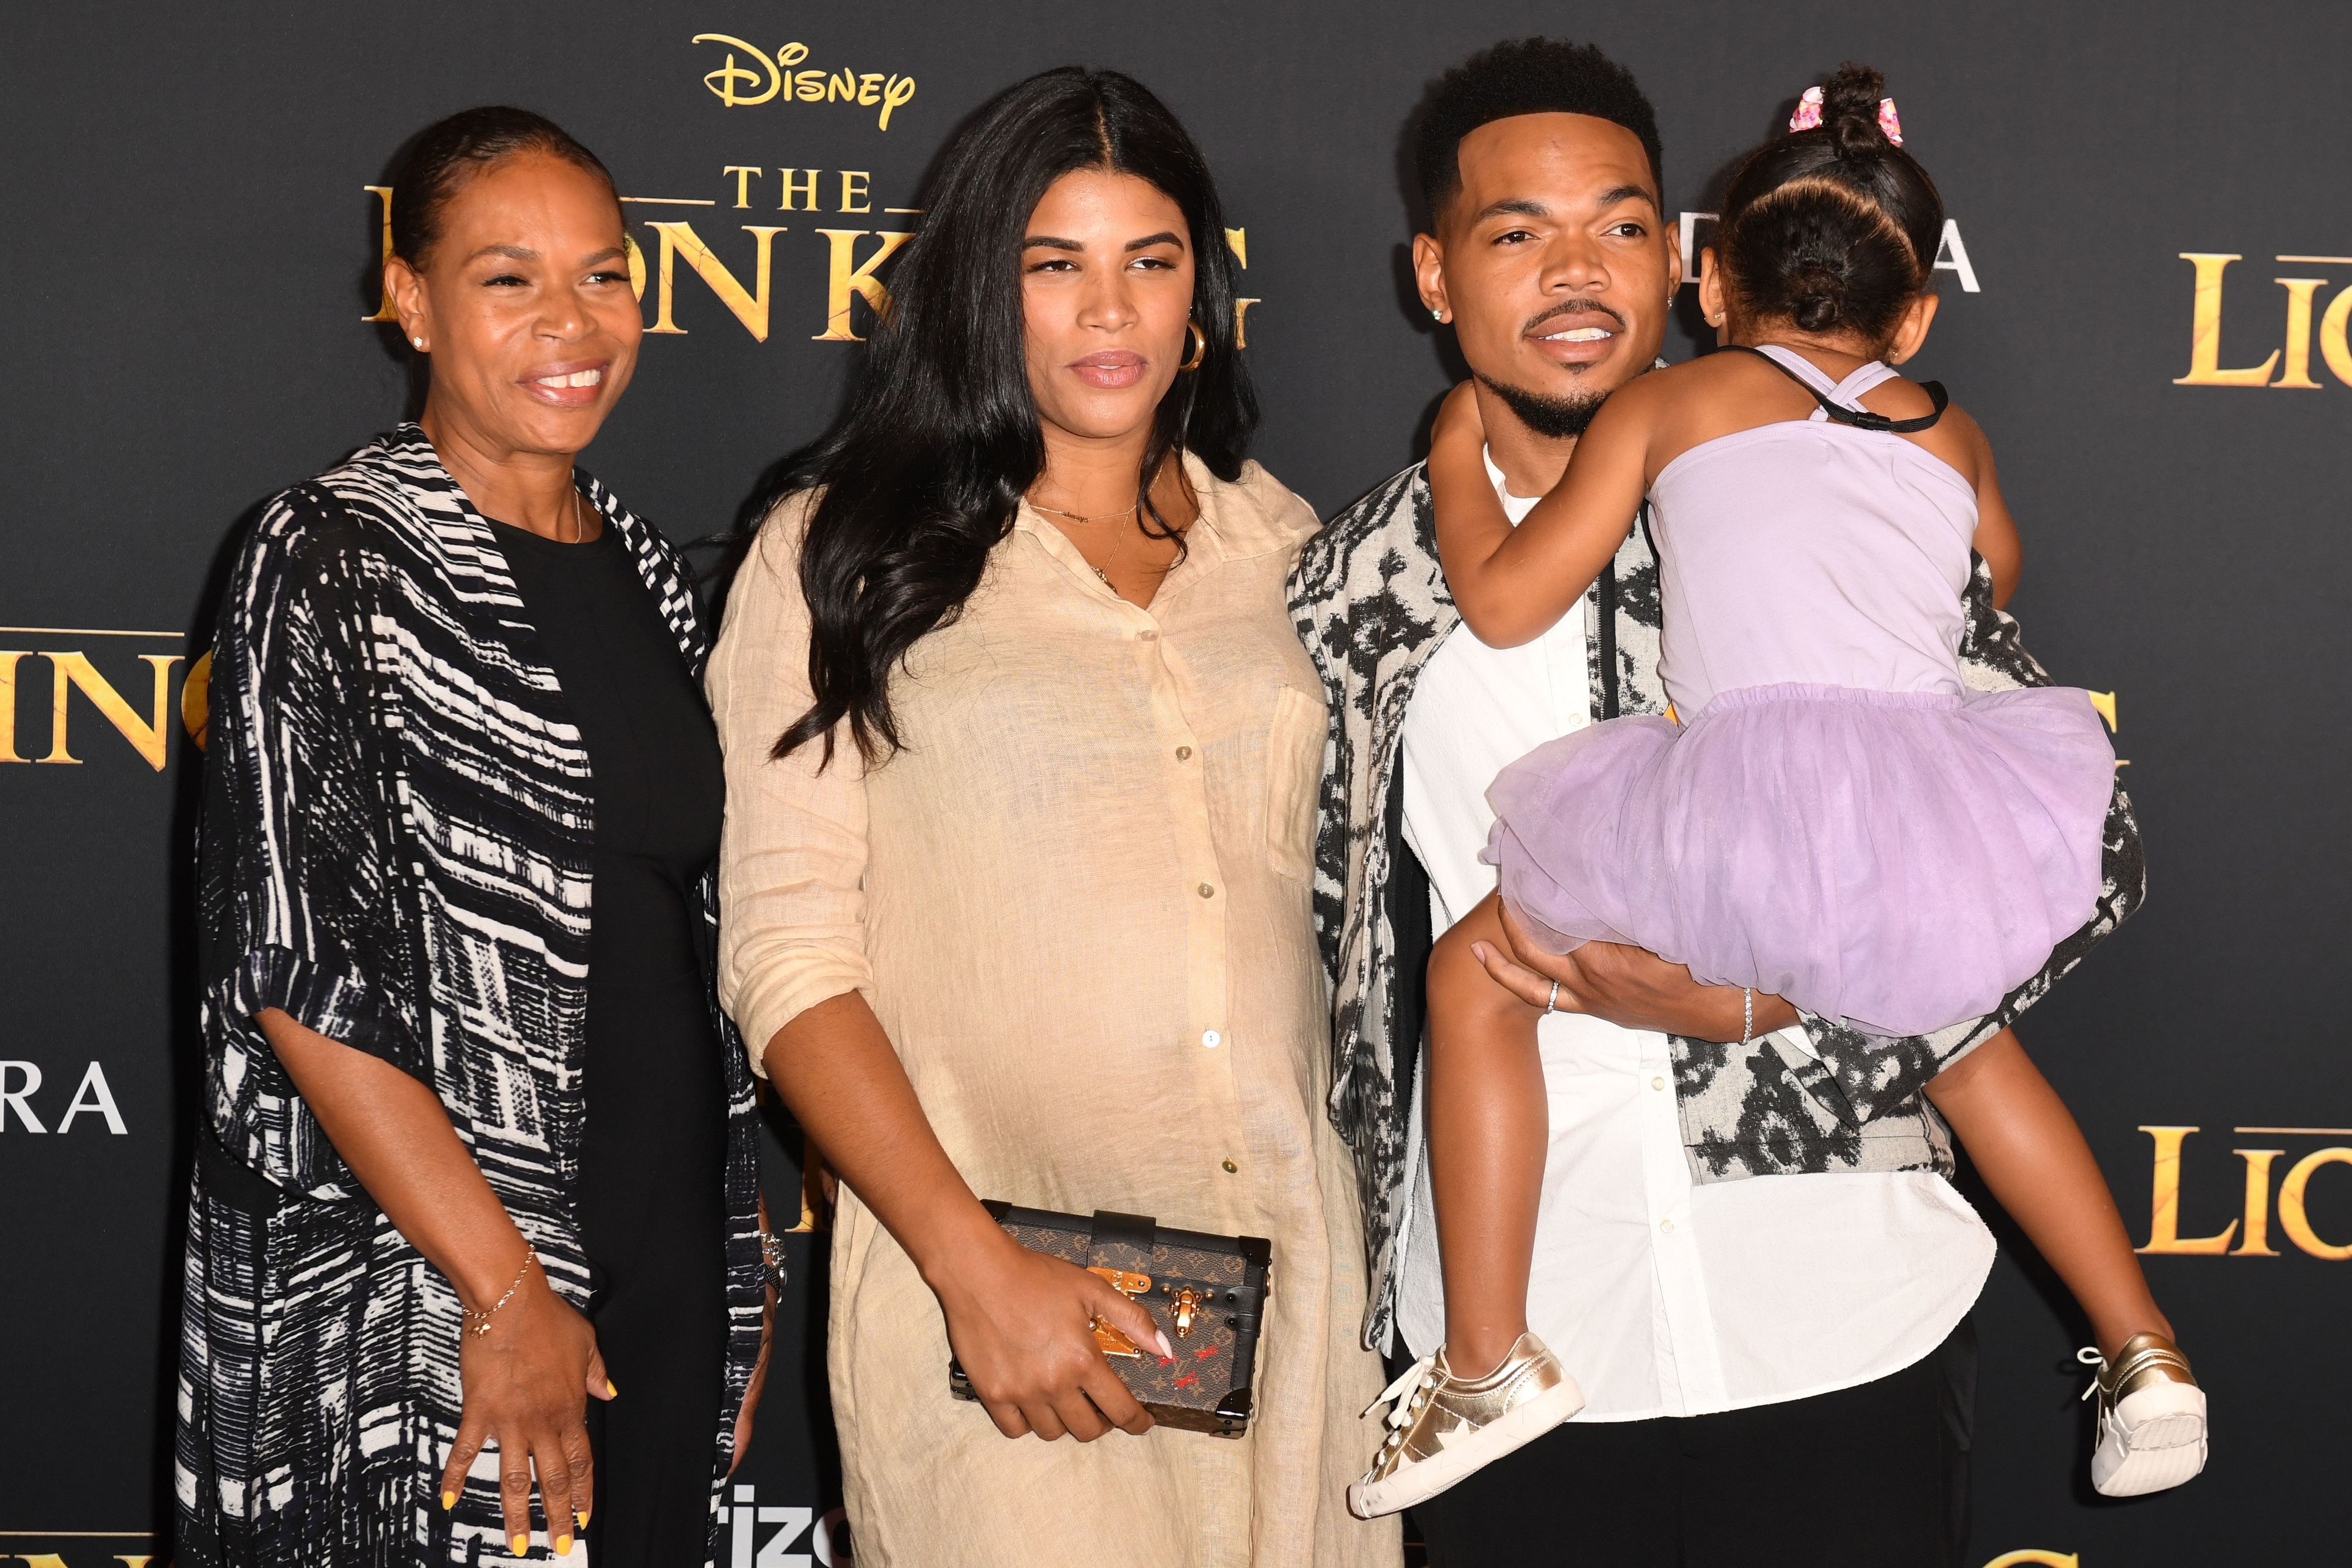 Three people at &#x27;The Lion King&#x27; premiere; a man holds a child, and two women stand beside them, dressed in smart attire